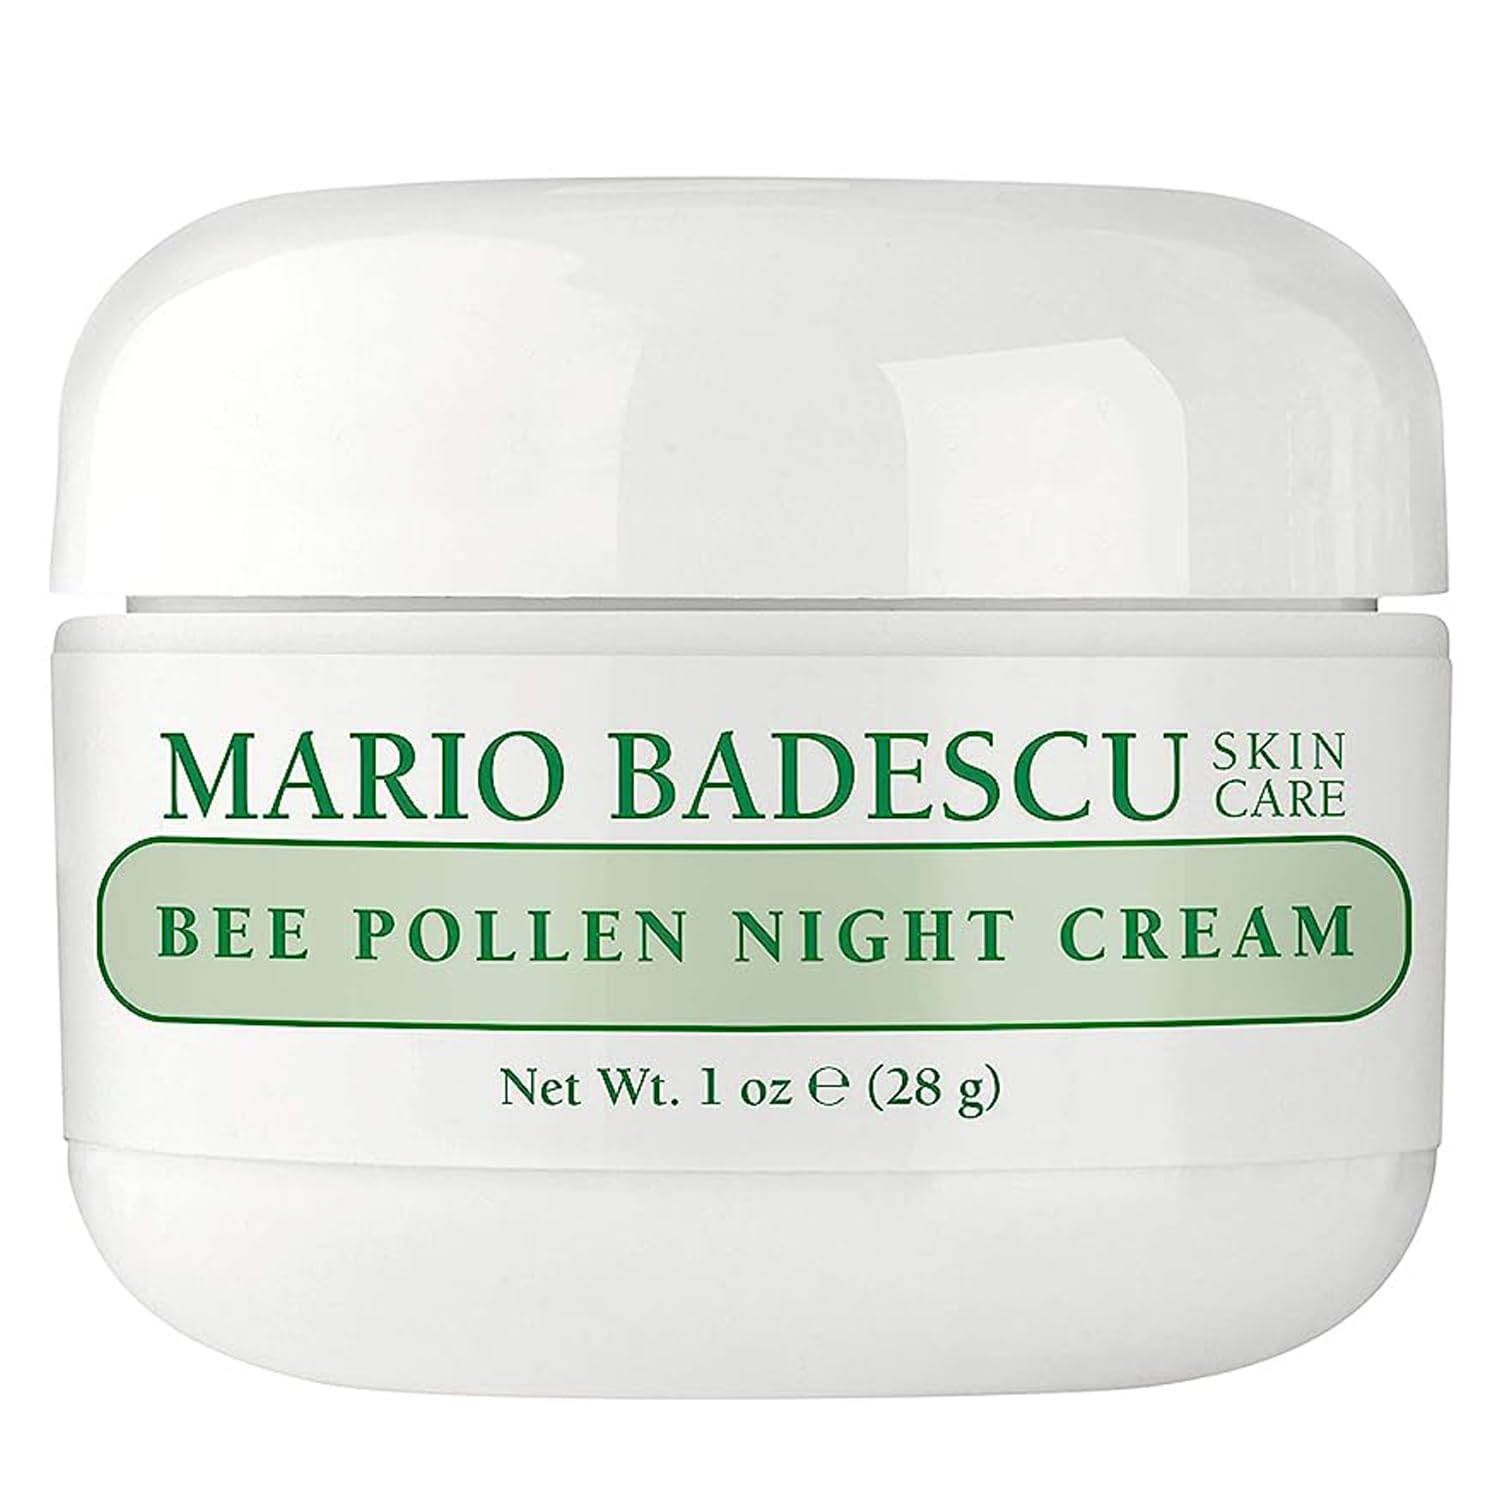 Mario Badescu Bee Pollen Night Cream for Women Anti Aging Overnight Face Cream Formulated with Smoothing Beeswax and Peanut Oil, Ideal for Combination, Dry or Sensitive Skin, 1